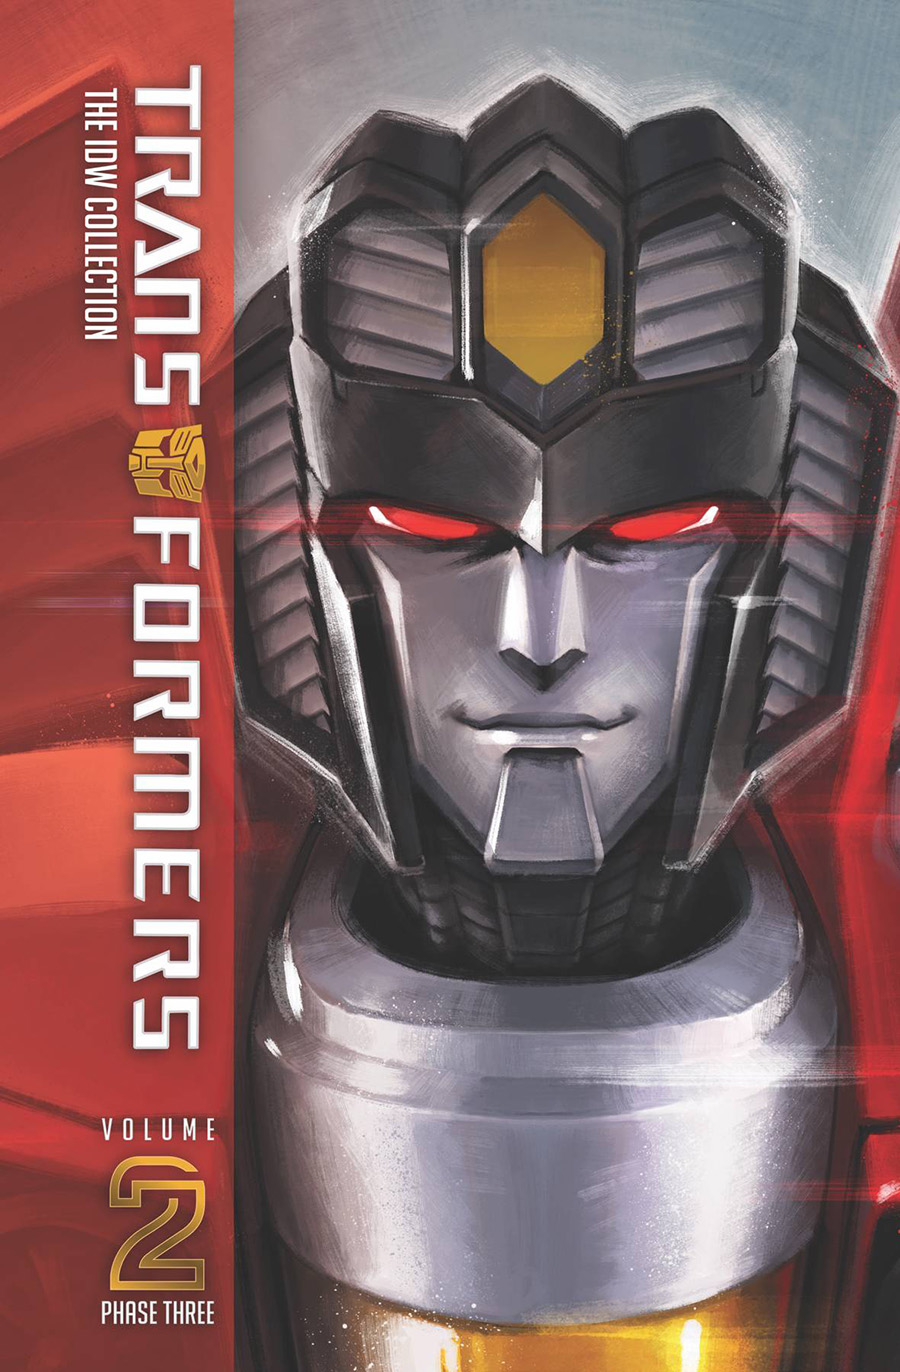 Transformers IDW Collection Phase Three Vol 2 HC